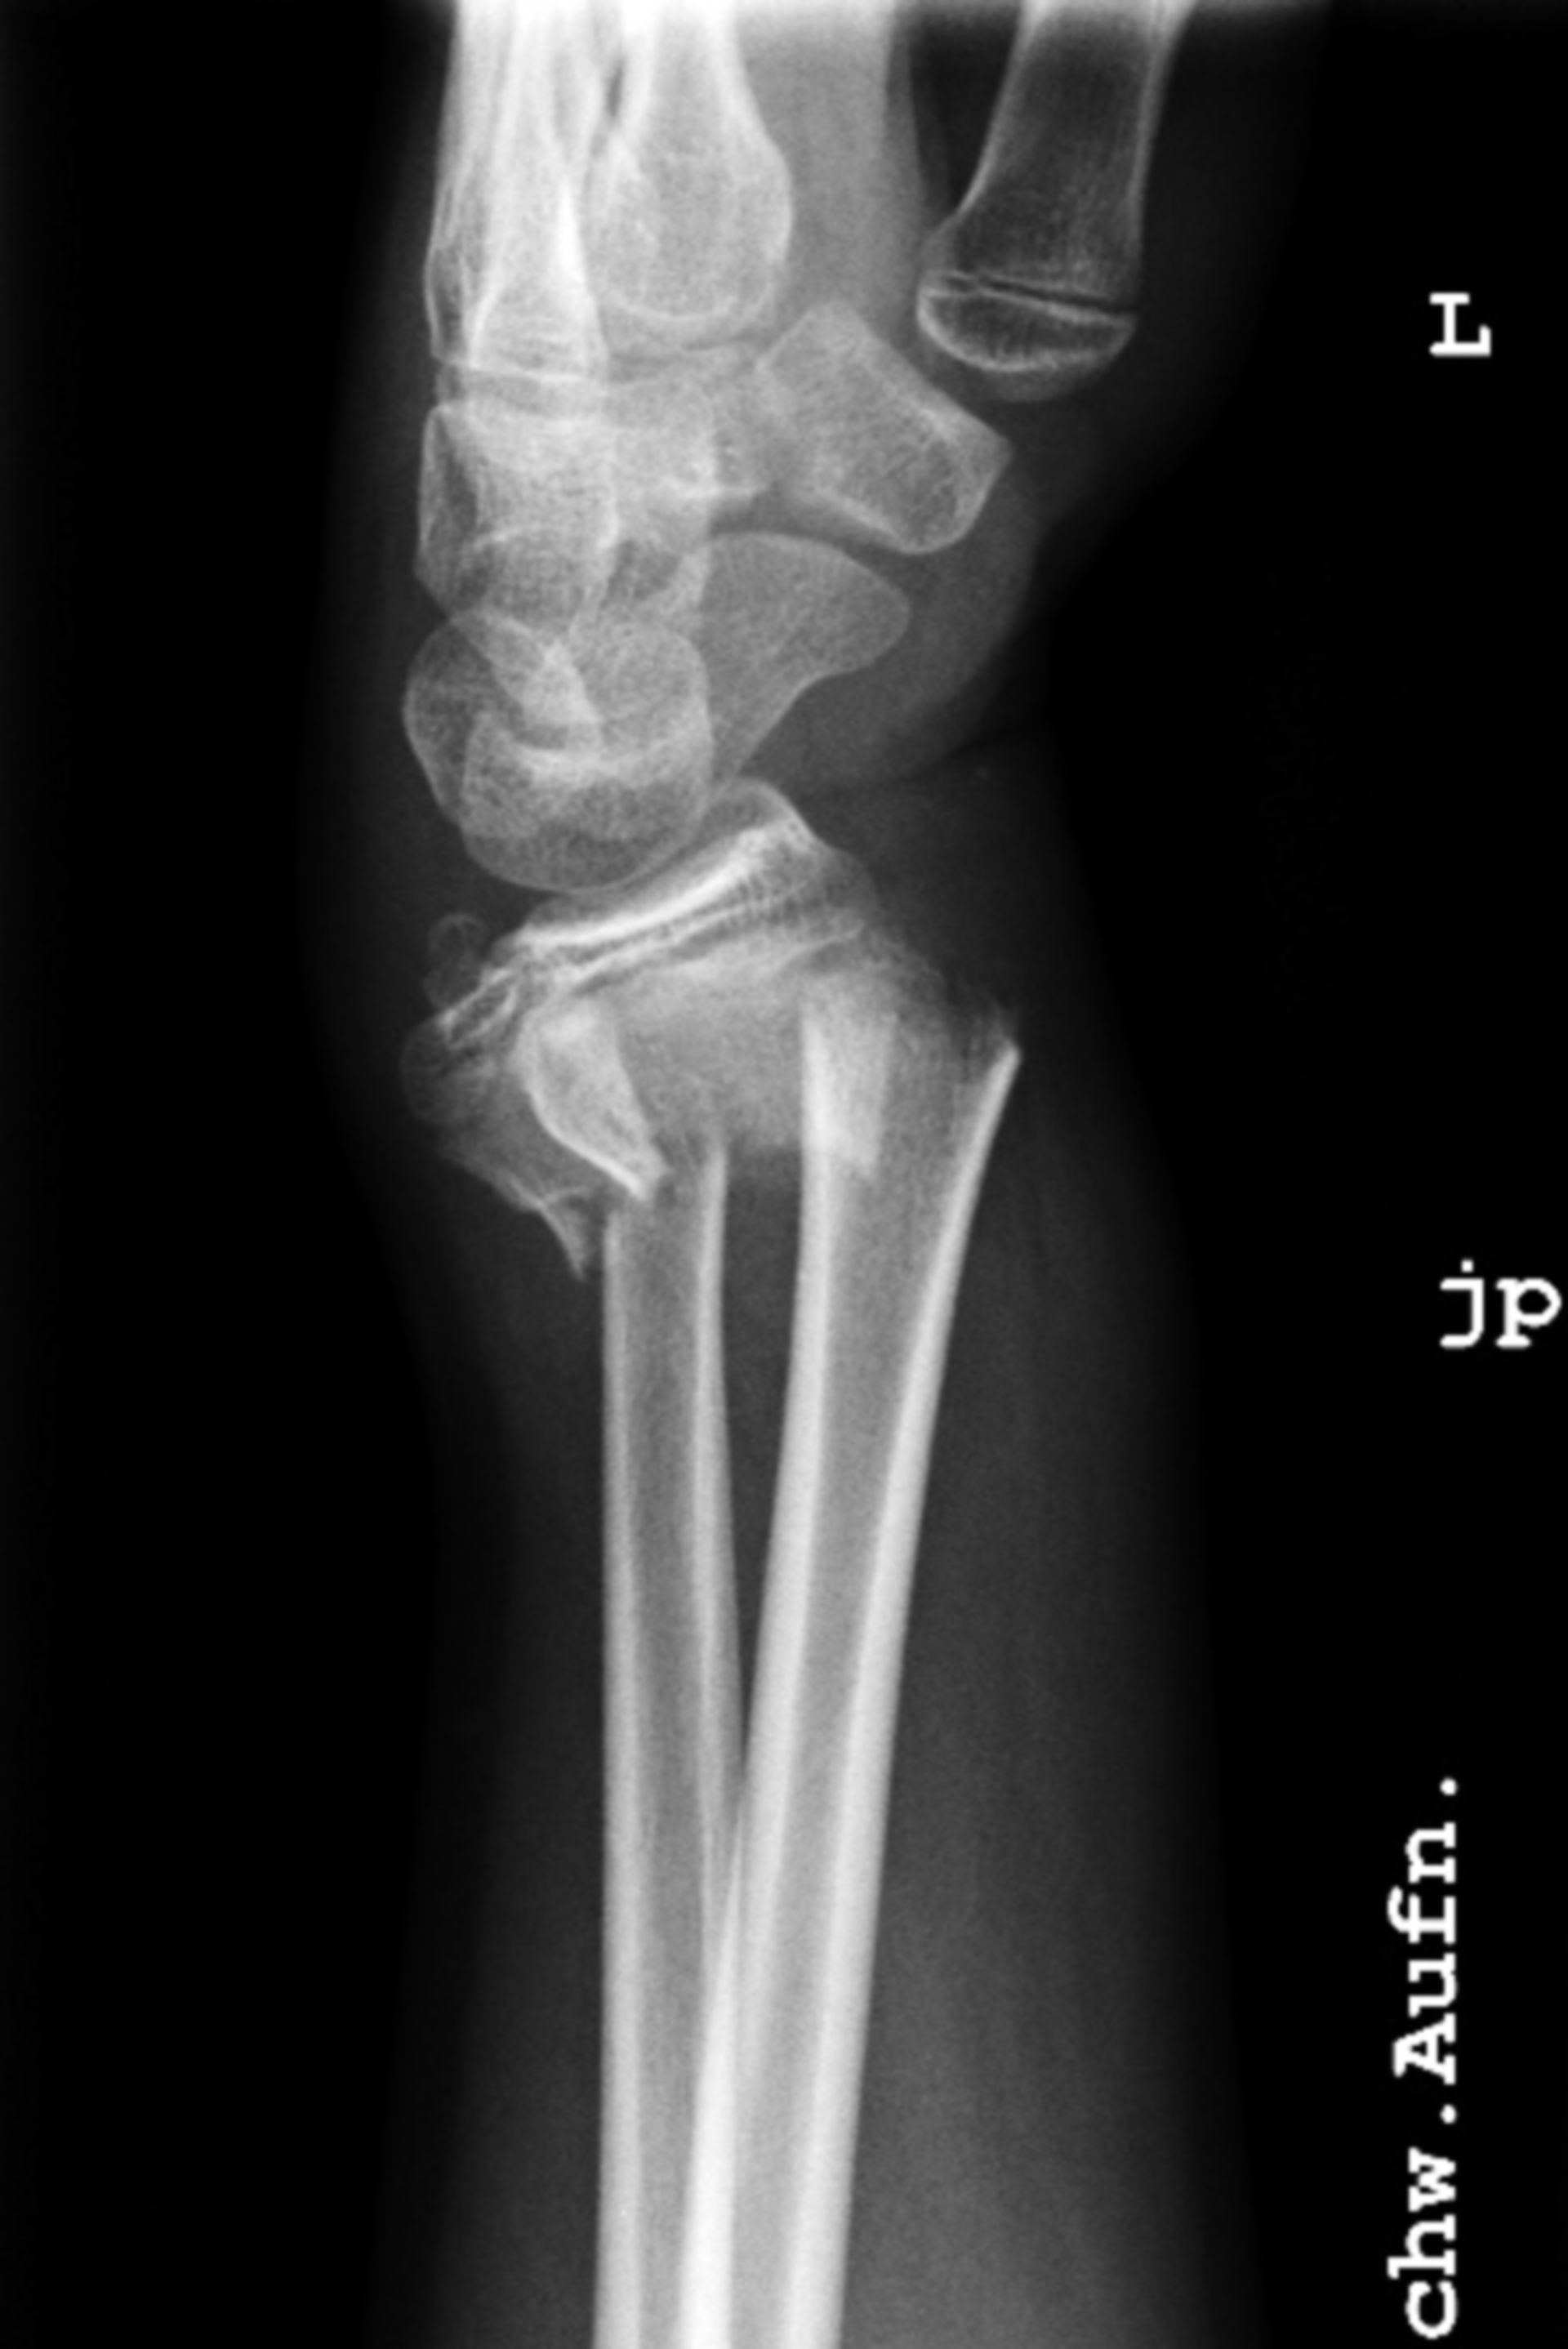 Forearm fracture - child